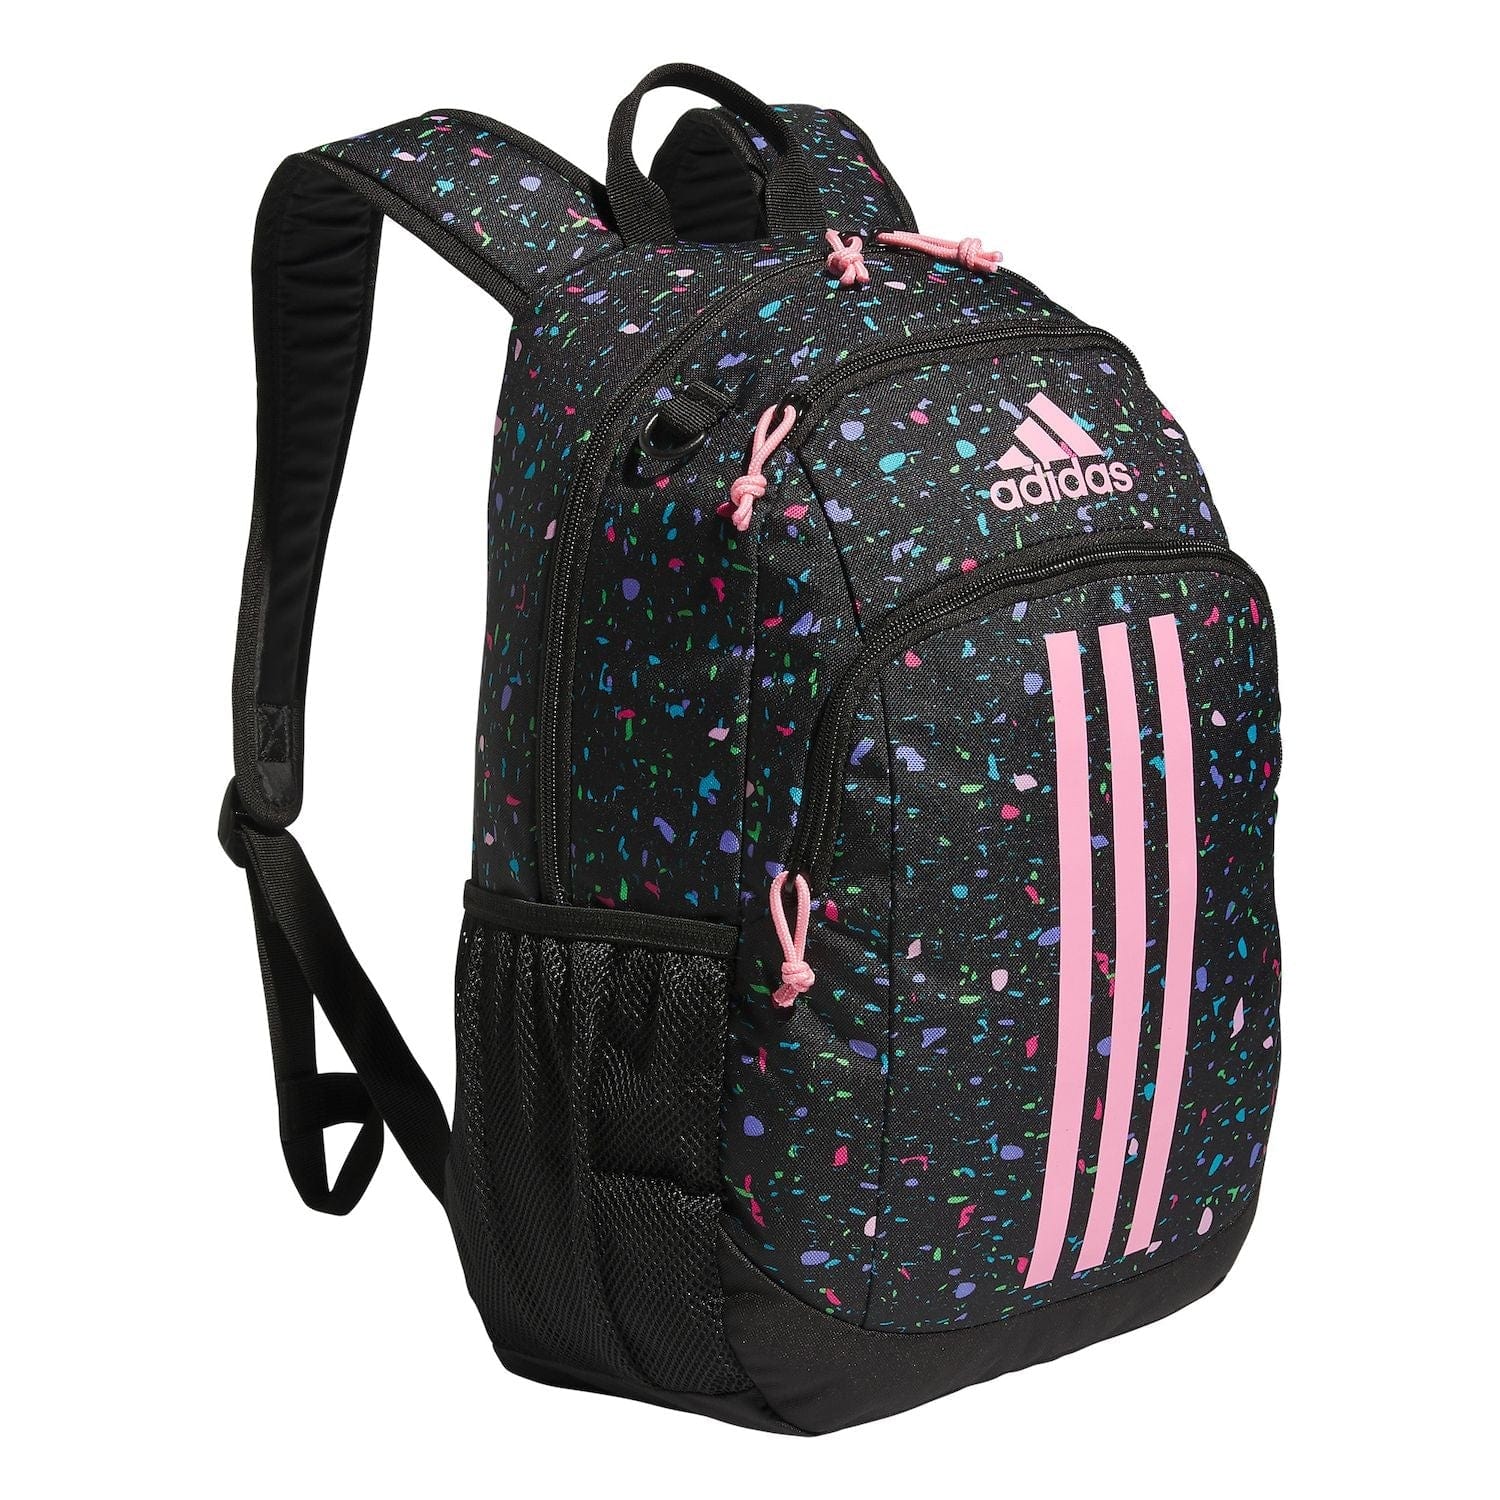 Young BTS Creator 2 Kids Backpack - CLASSY CLOSET BOUTIQUEYoung BTS Creator 2 Kids Backpackbackpack4844672Speckle Black Bliss